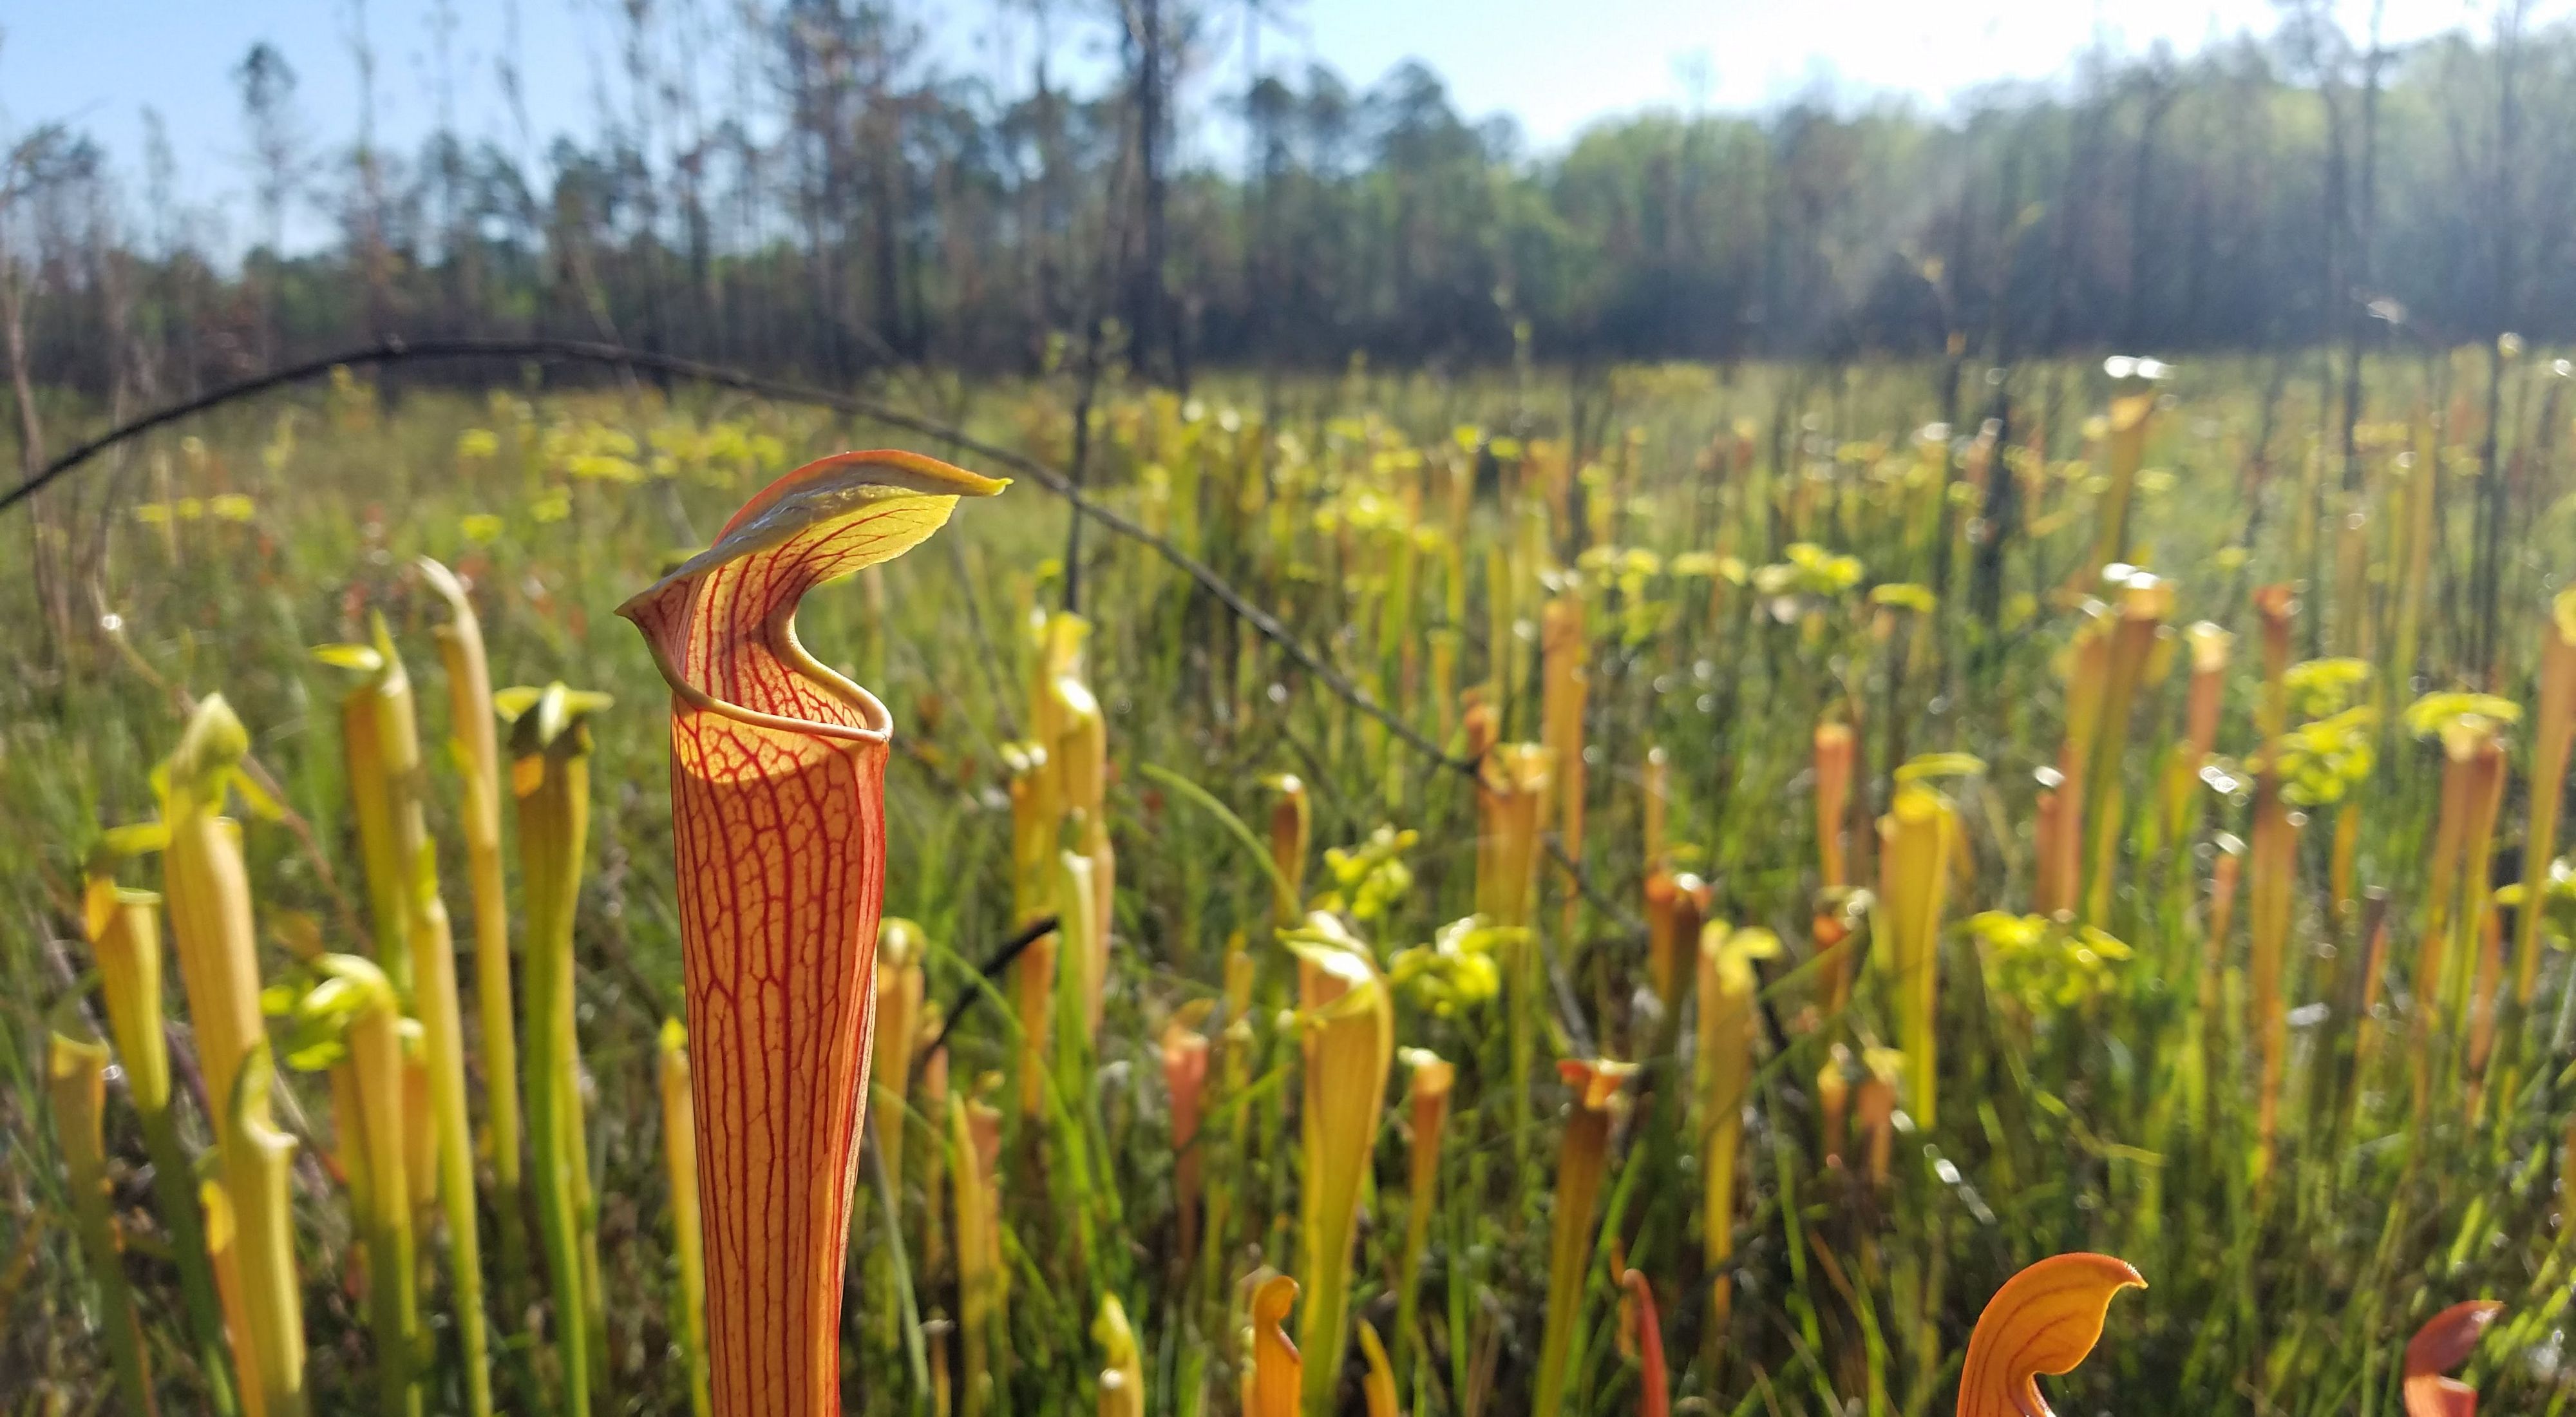 Pitcher plants in bloom at the Abita Creek Flatwoods Preserve.